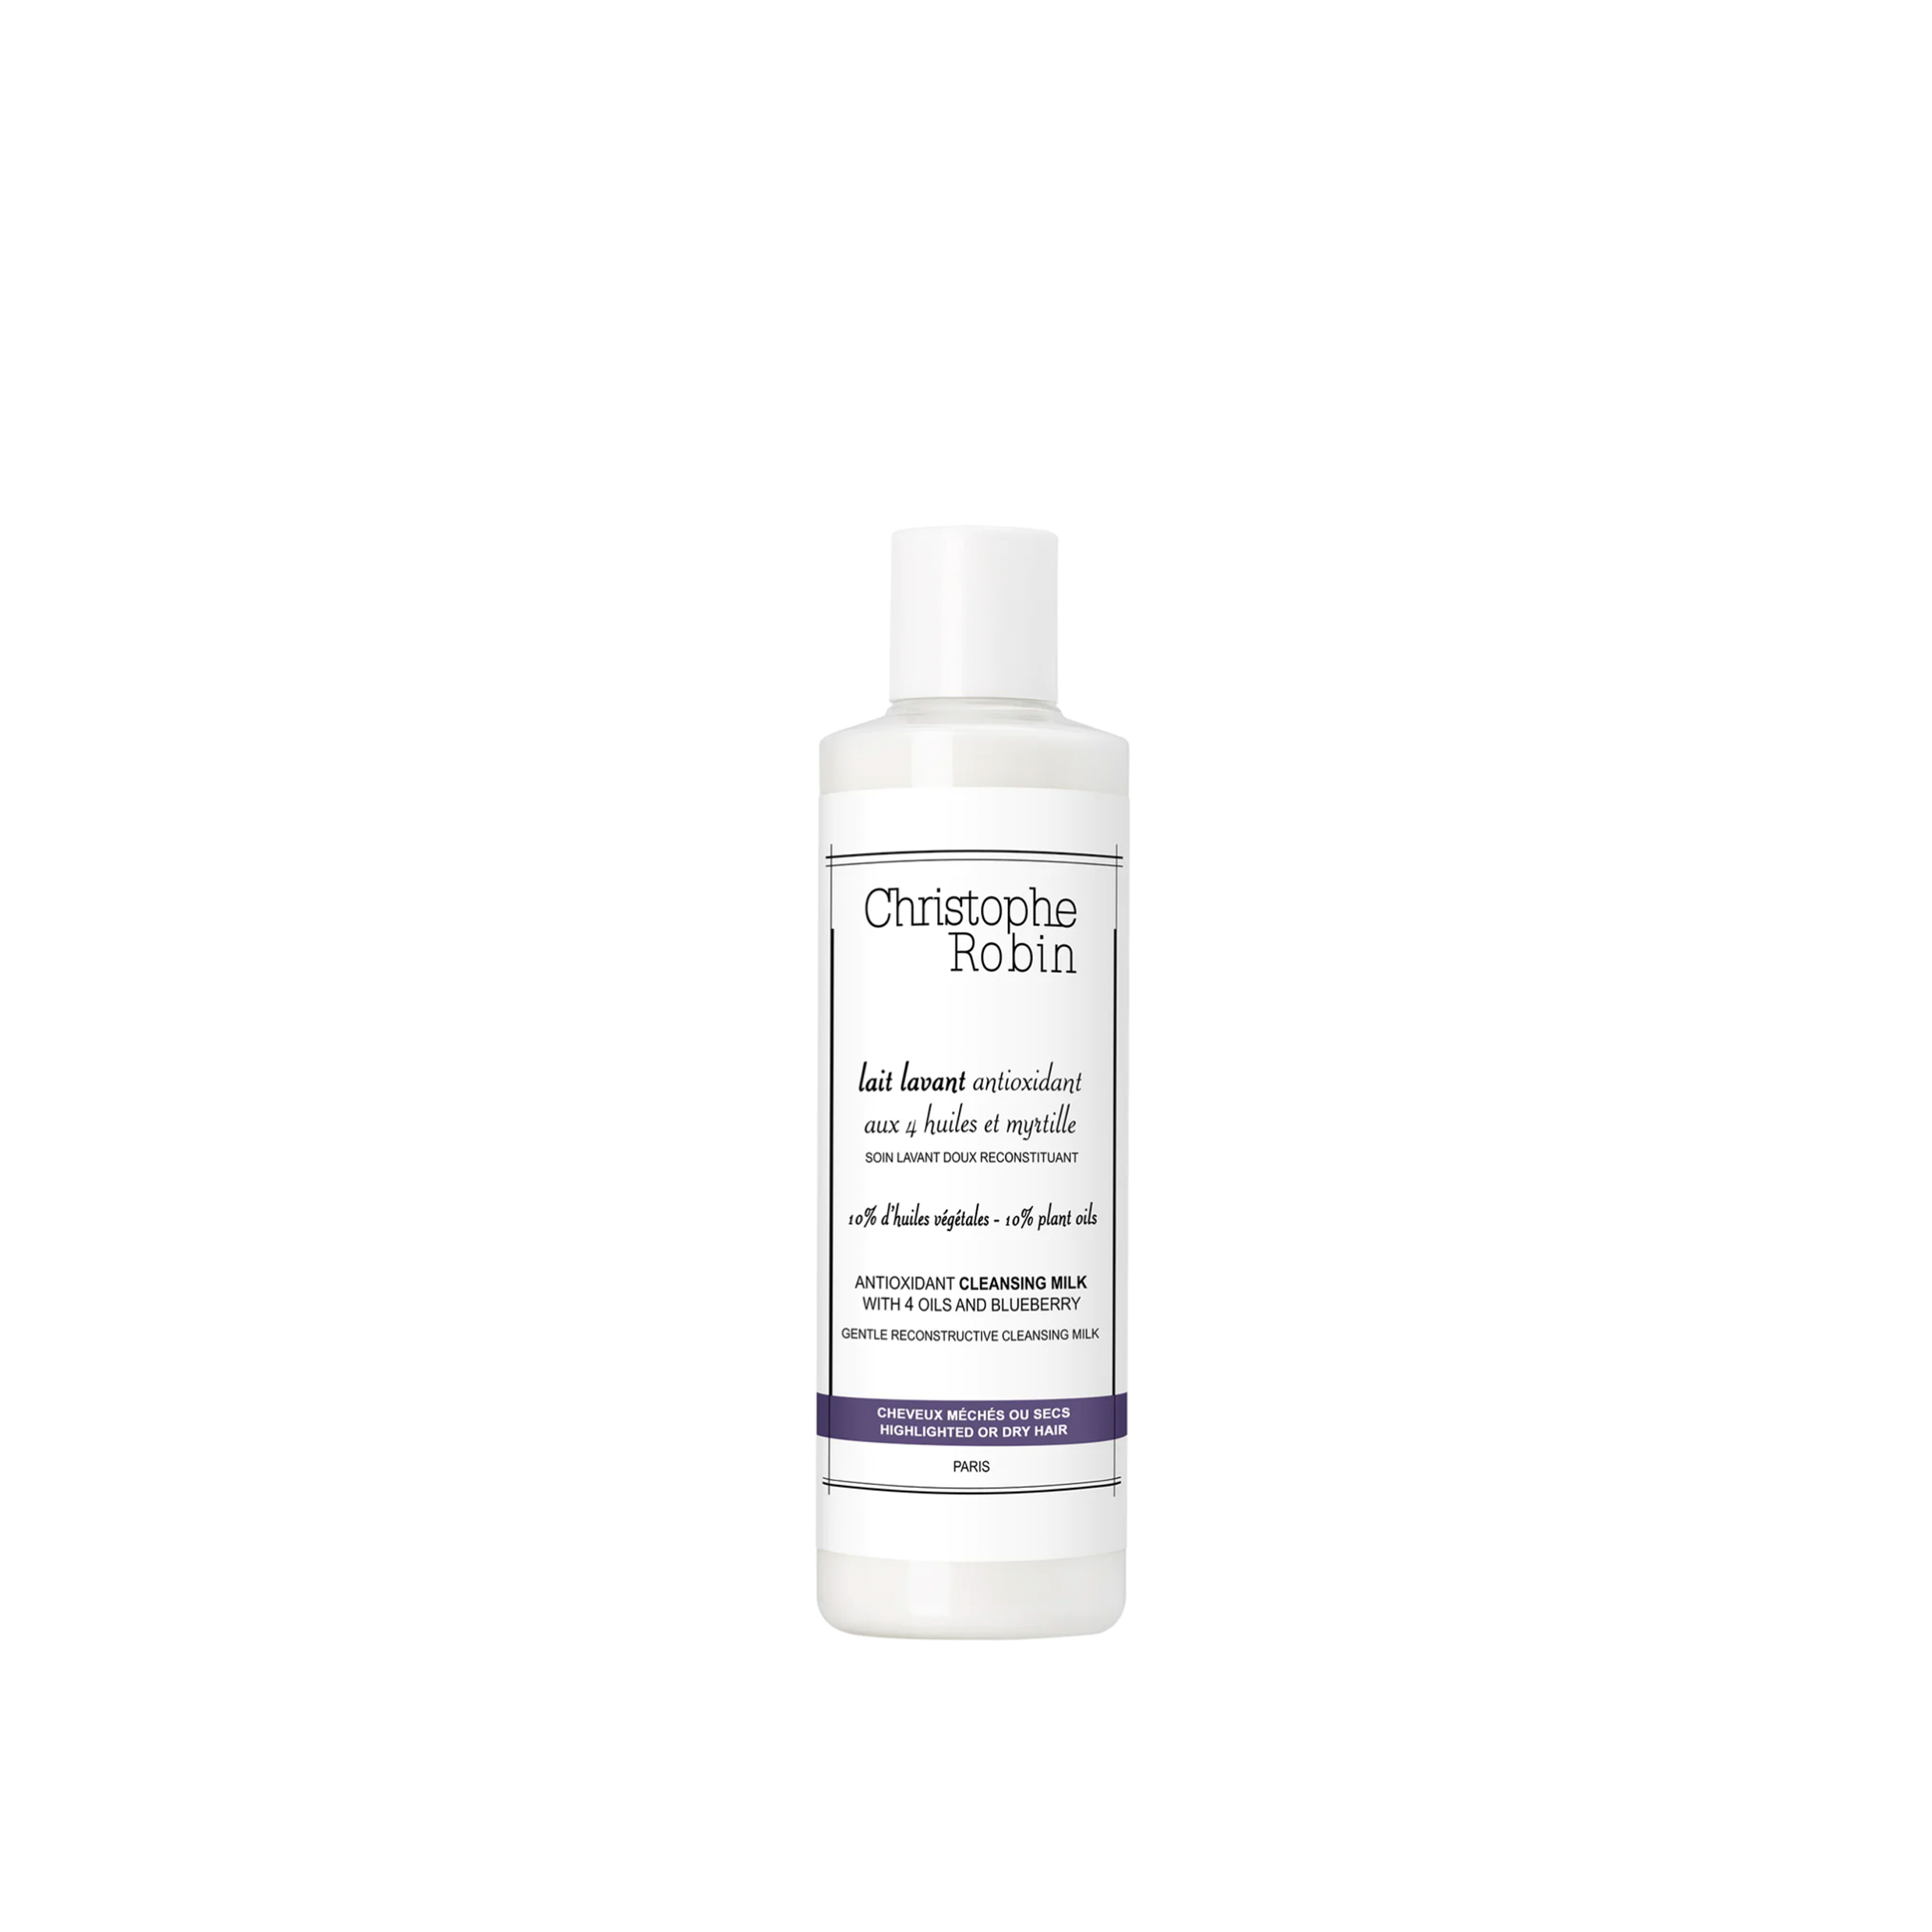 Christophe Robin Antioxidant Cleansing Milk With 4 Oils And Blueberry 250ml